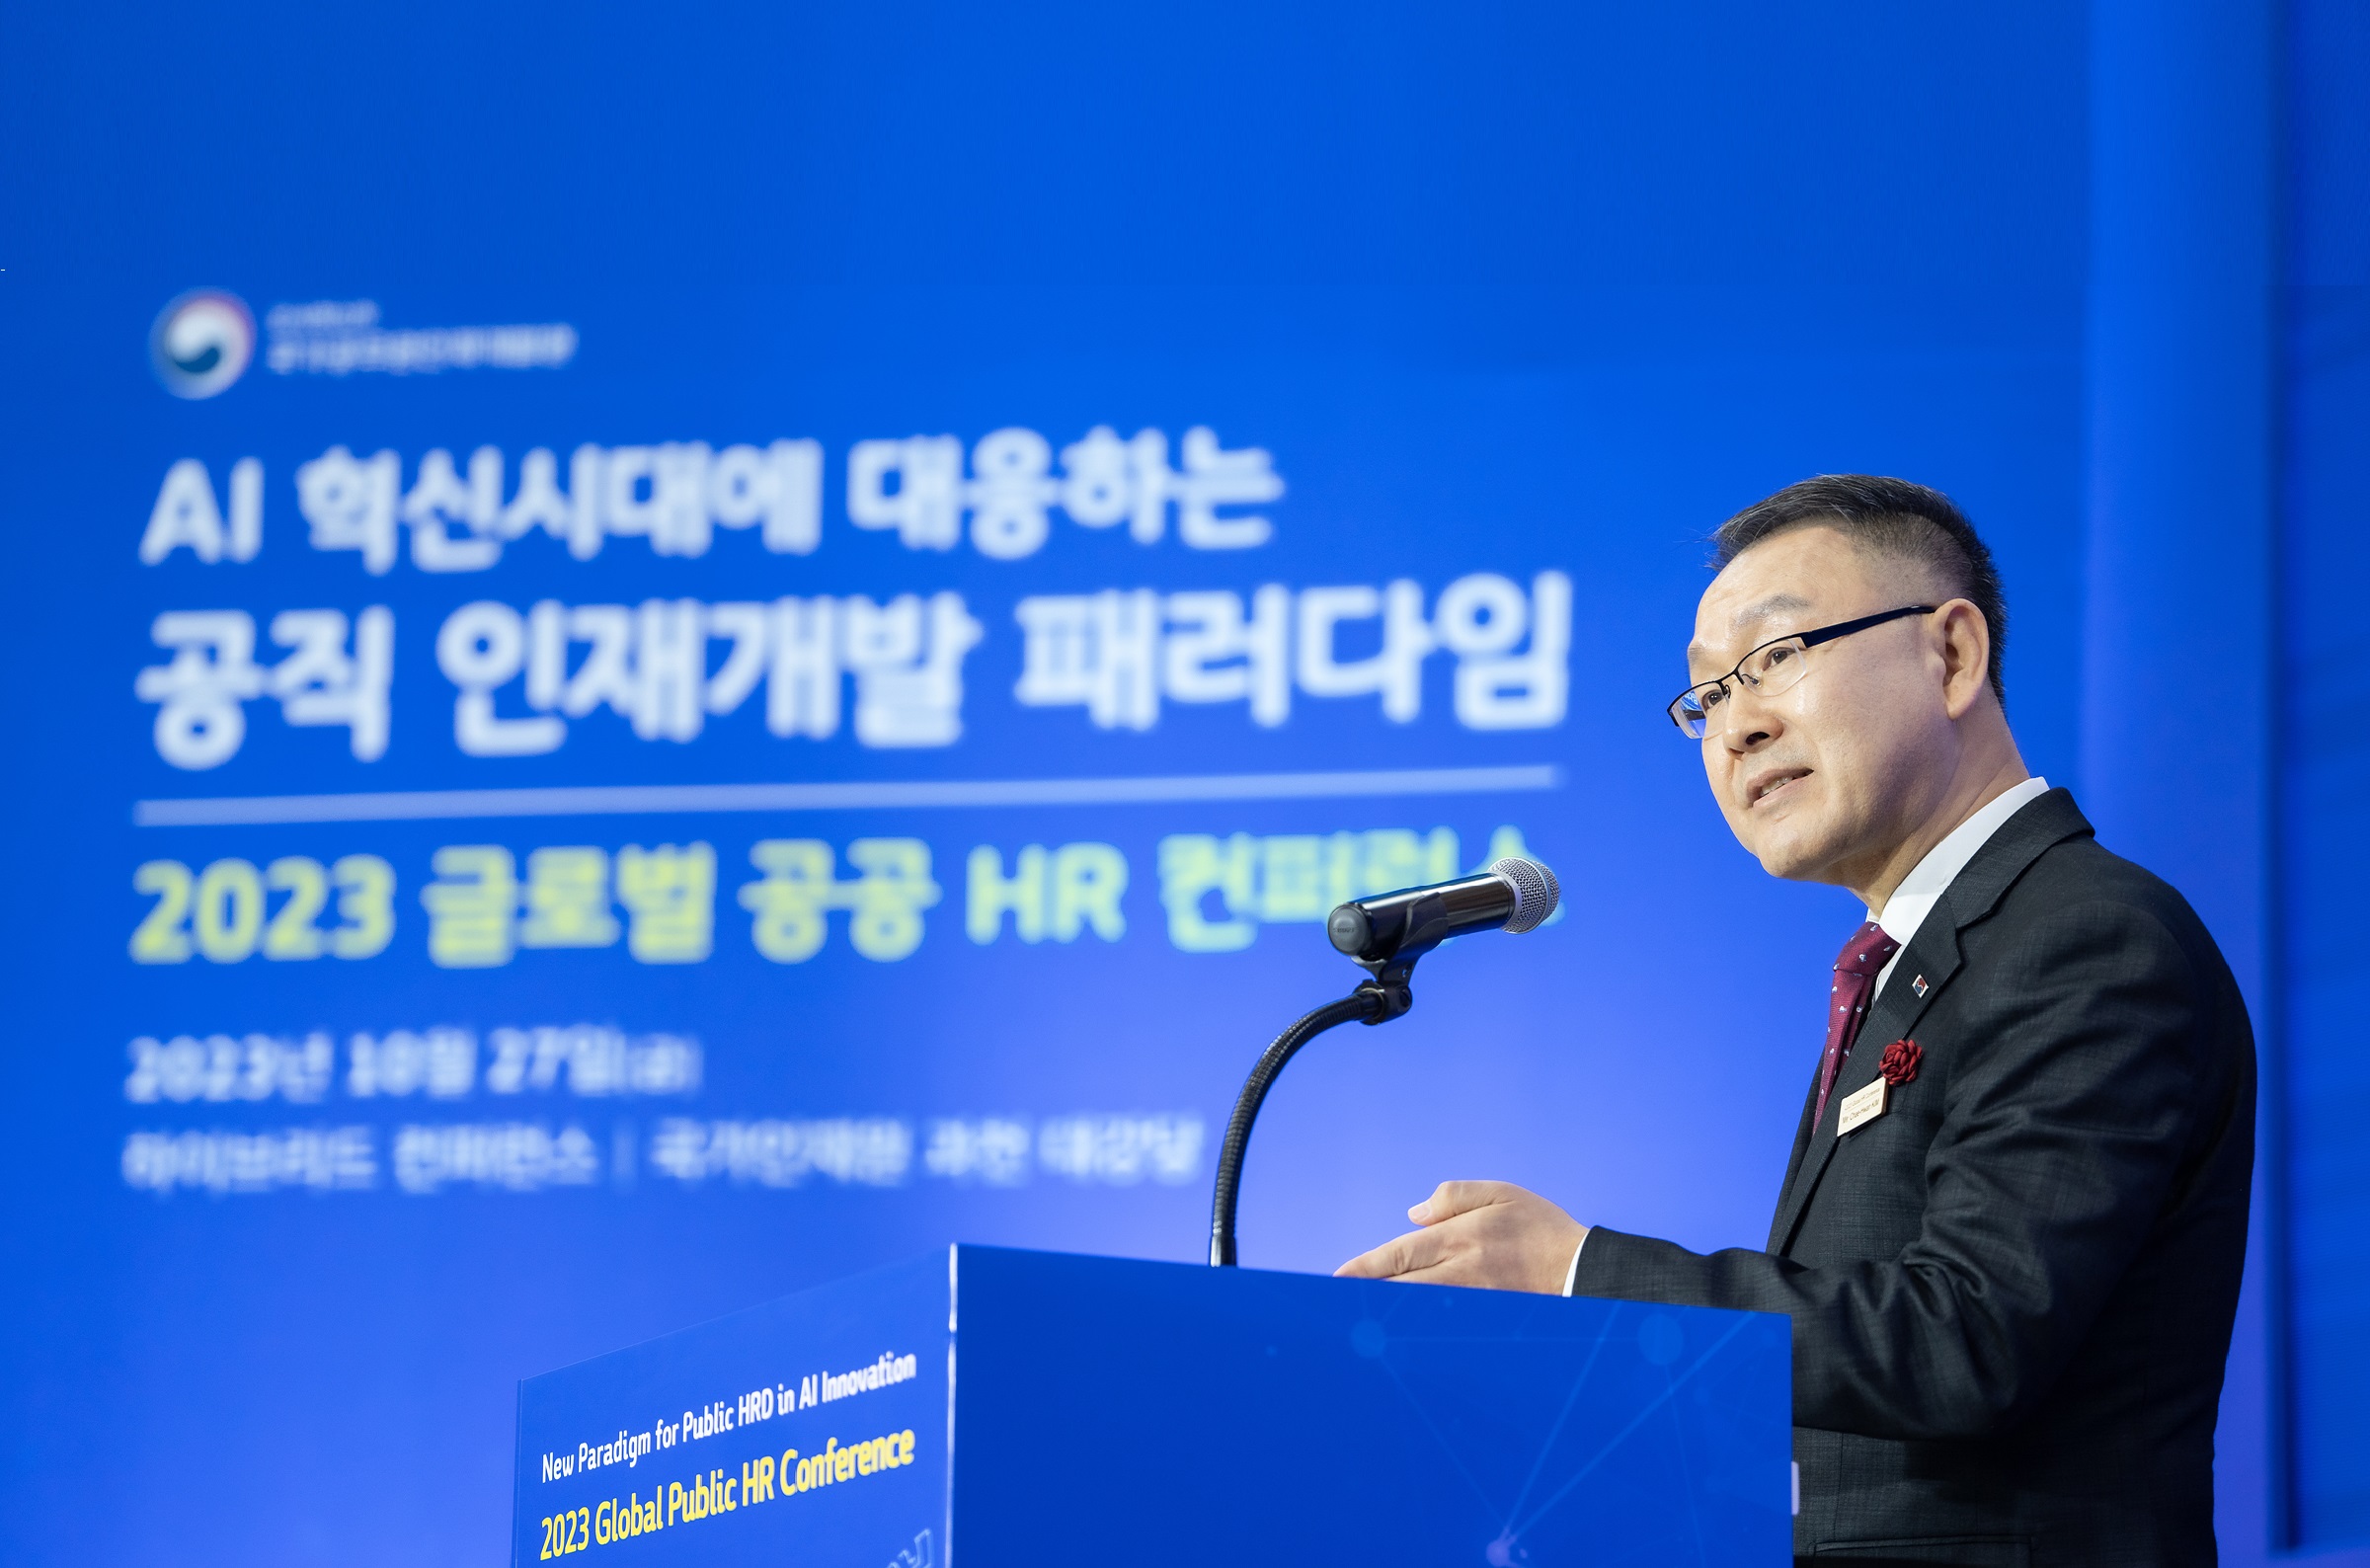 President Kim Chae-Hwan During His Welcoming Speech at the Global Public HR Conference 2023